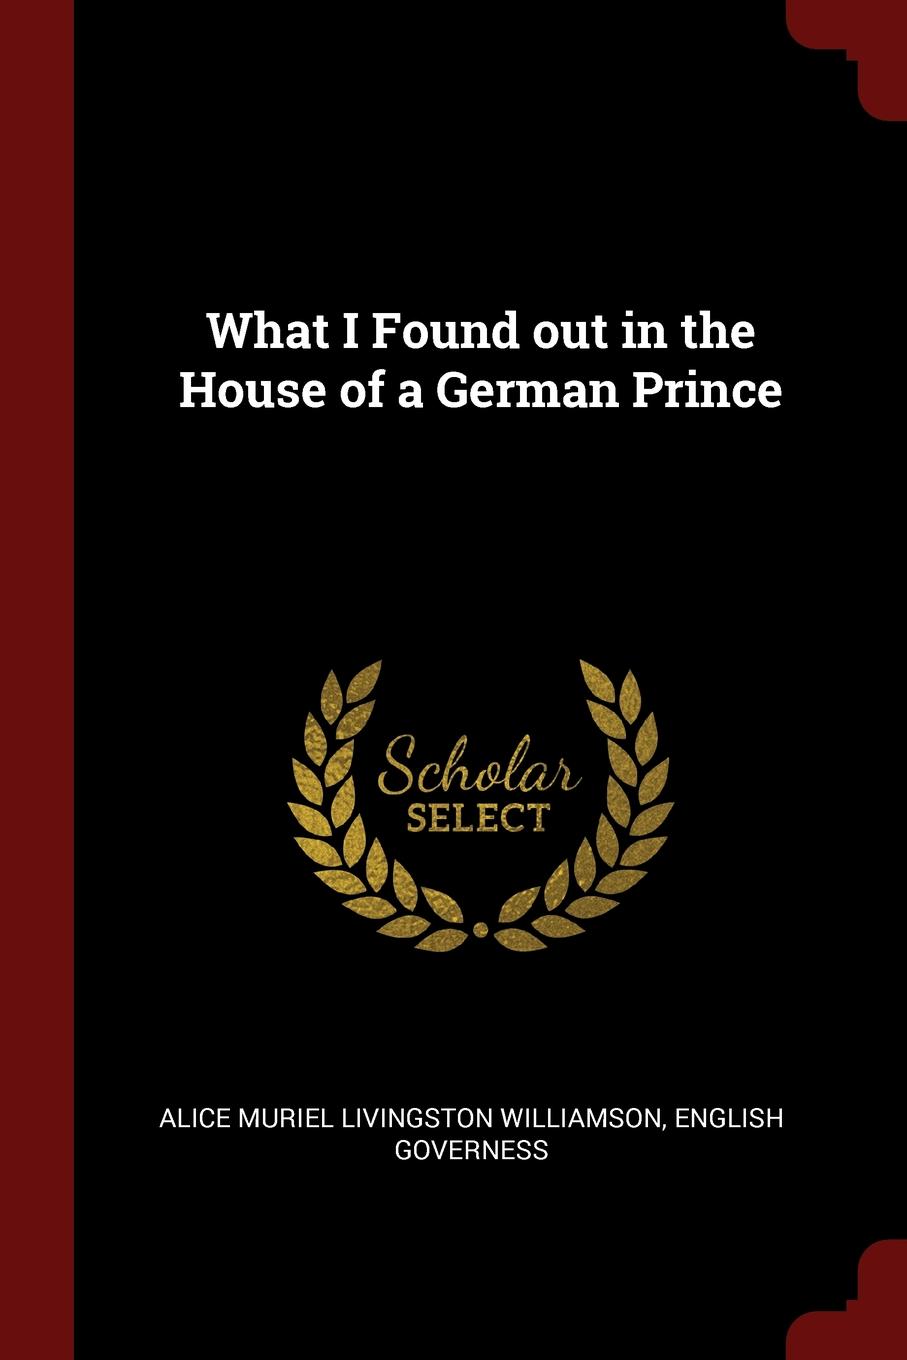 What I Found out in the House of a German Prince